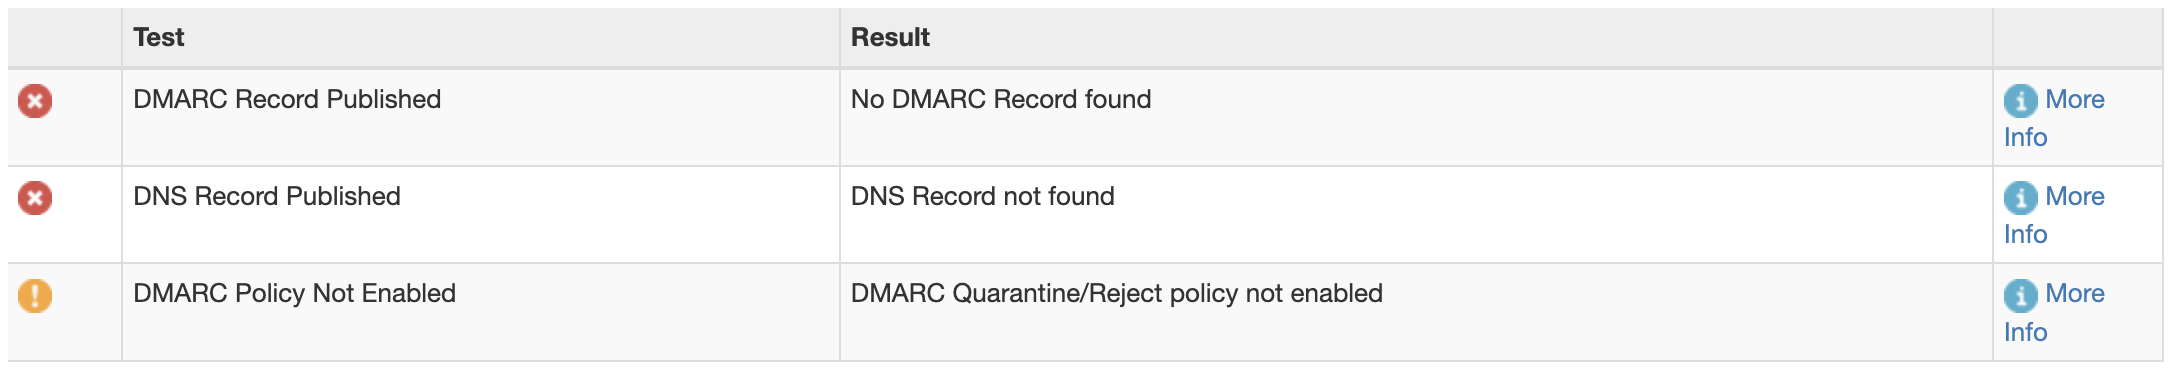 DMARC not found.png